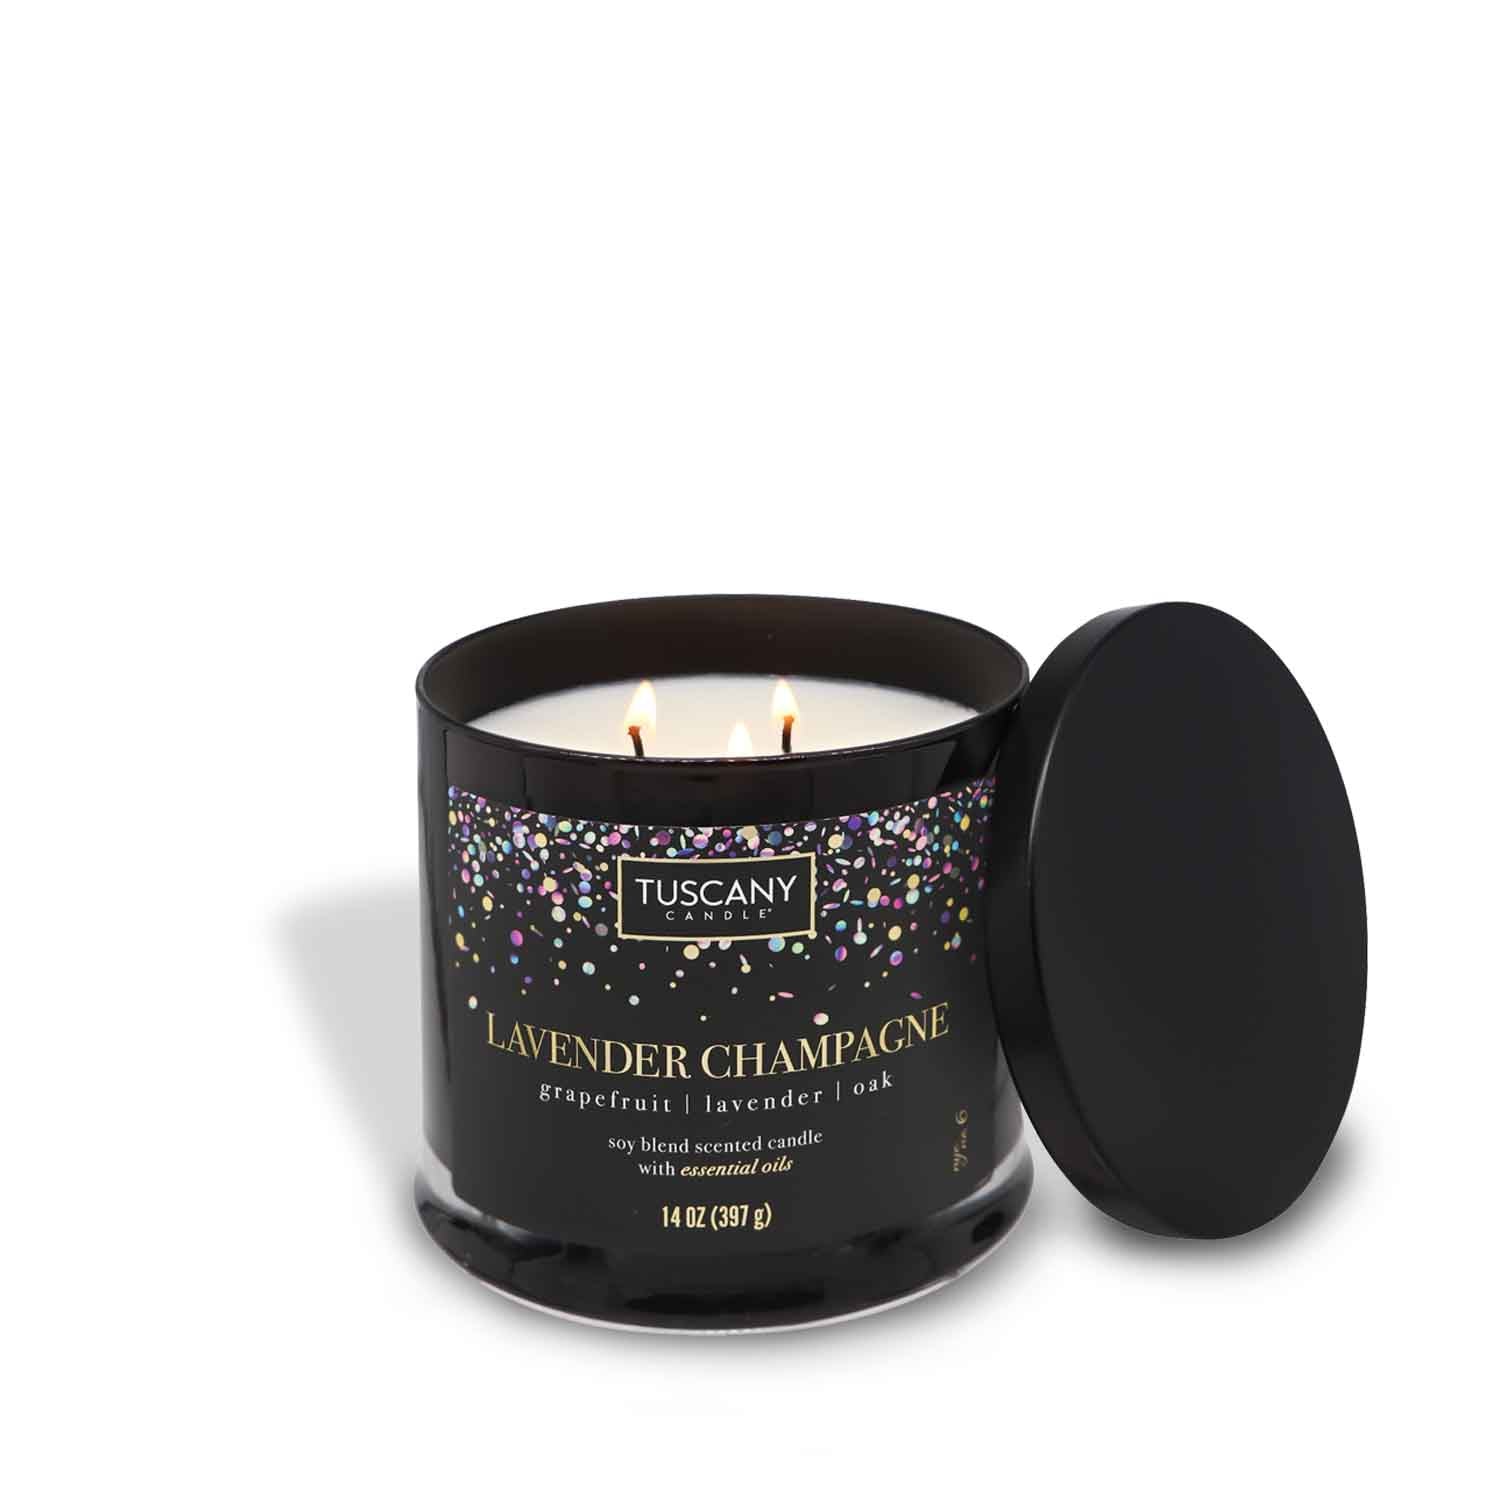 A Lavender Champagne Scented Jar Candle (15 oz) – Celebrations Collection by Tuscany Candle in a black tin with confetti, evoking a winter calm.